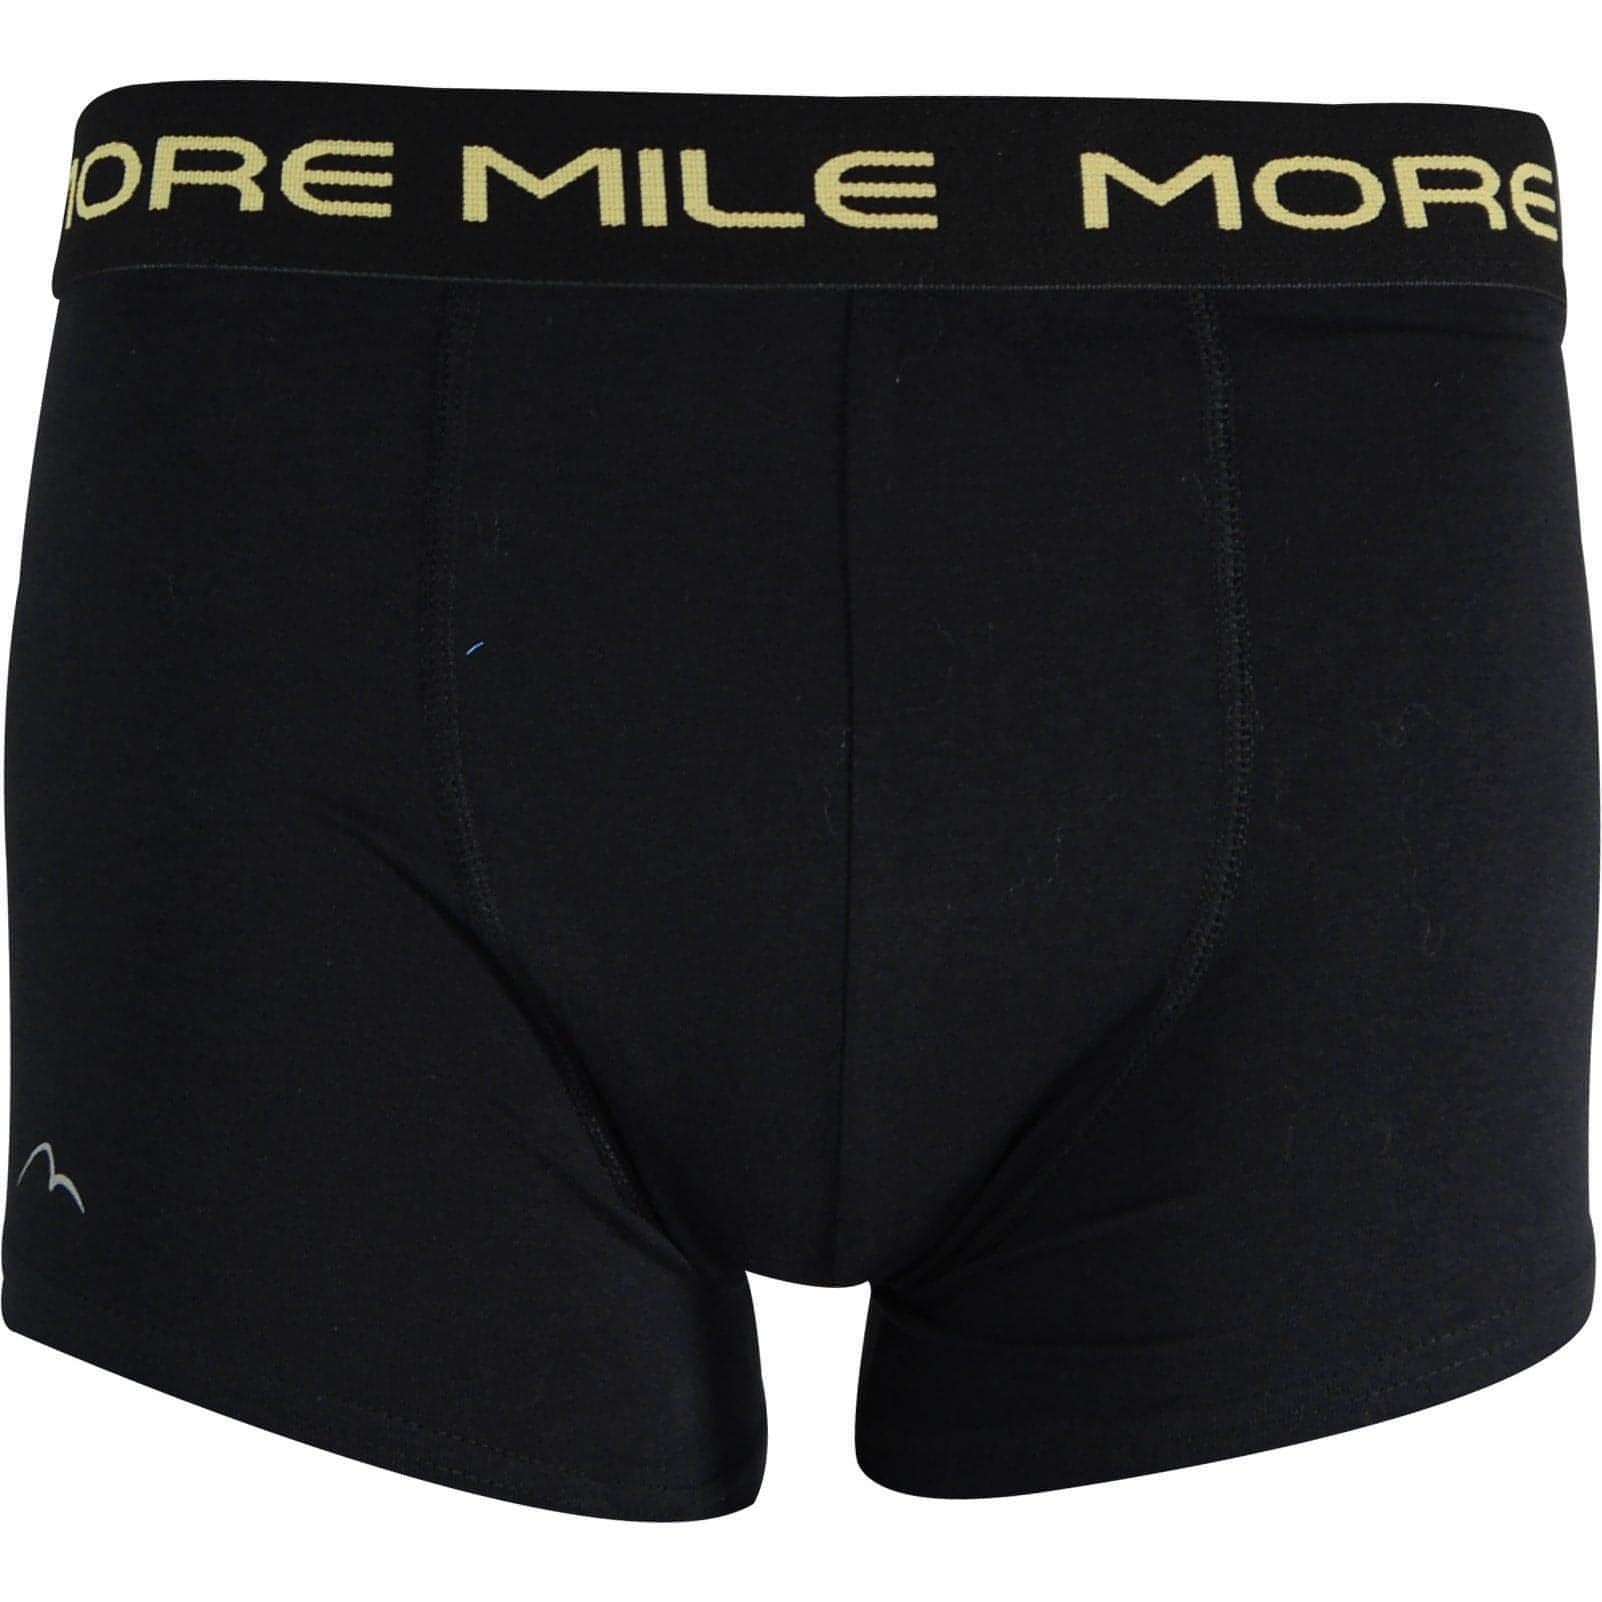 More Mile Pack Boxer 1P204901Wm Yellowpink Yellow Front - Front View